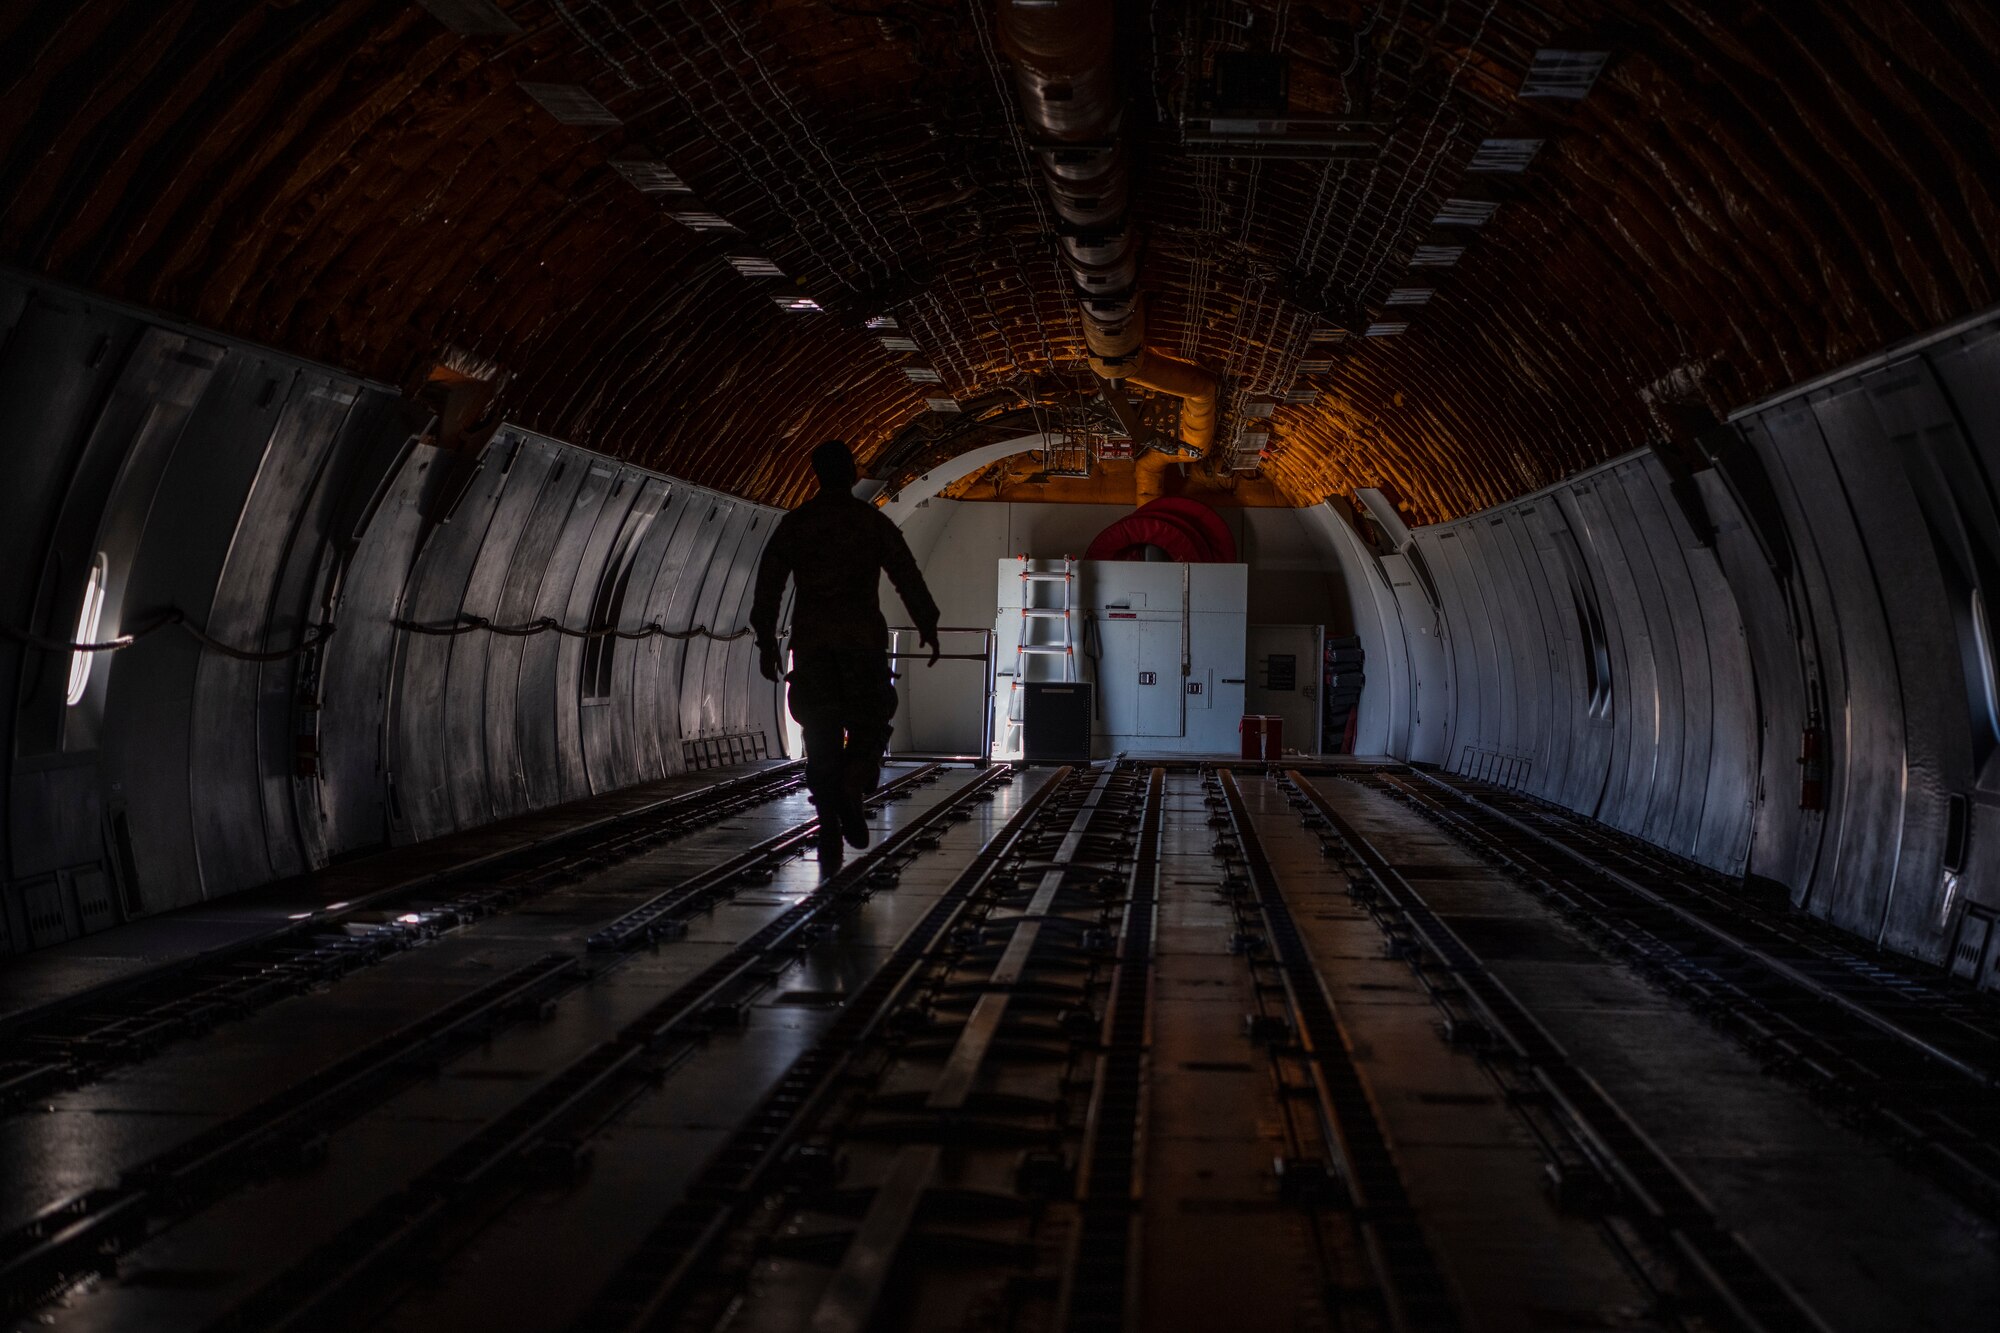 The silhouette of a man in the back of a large military aircraft.